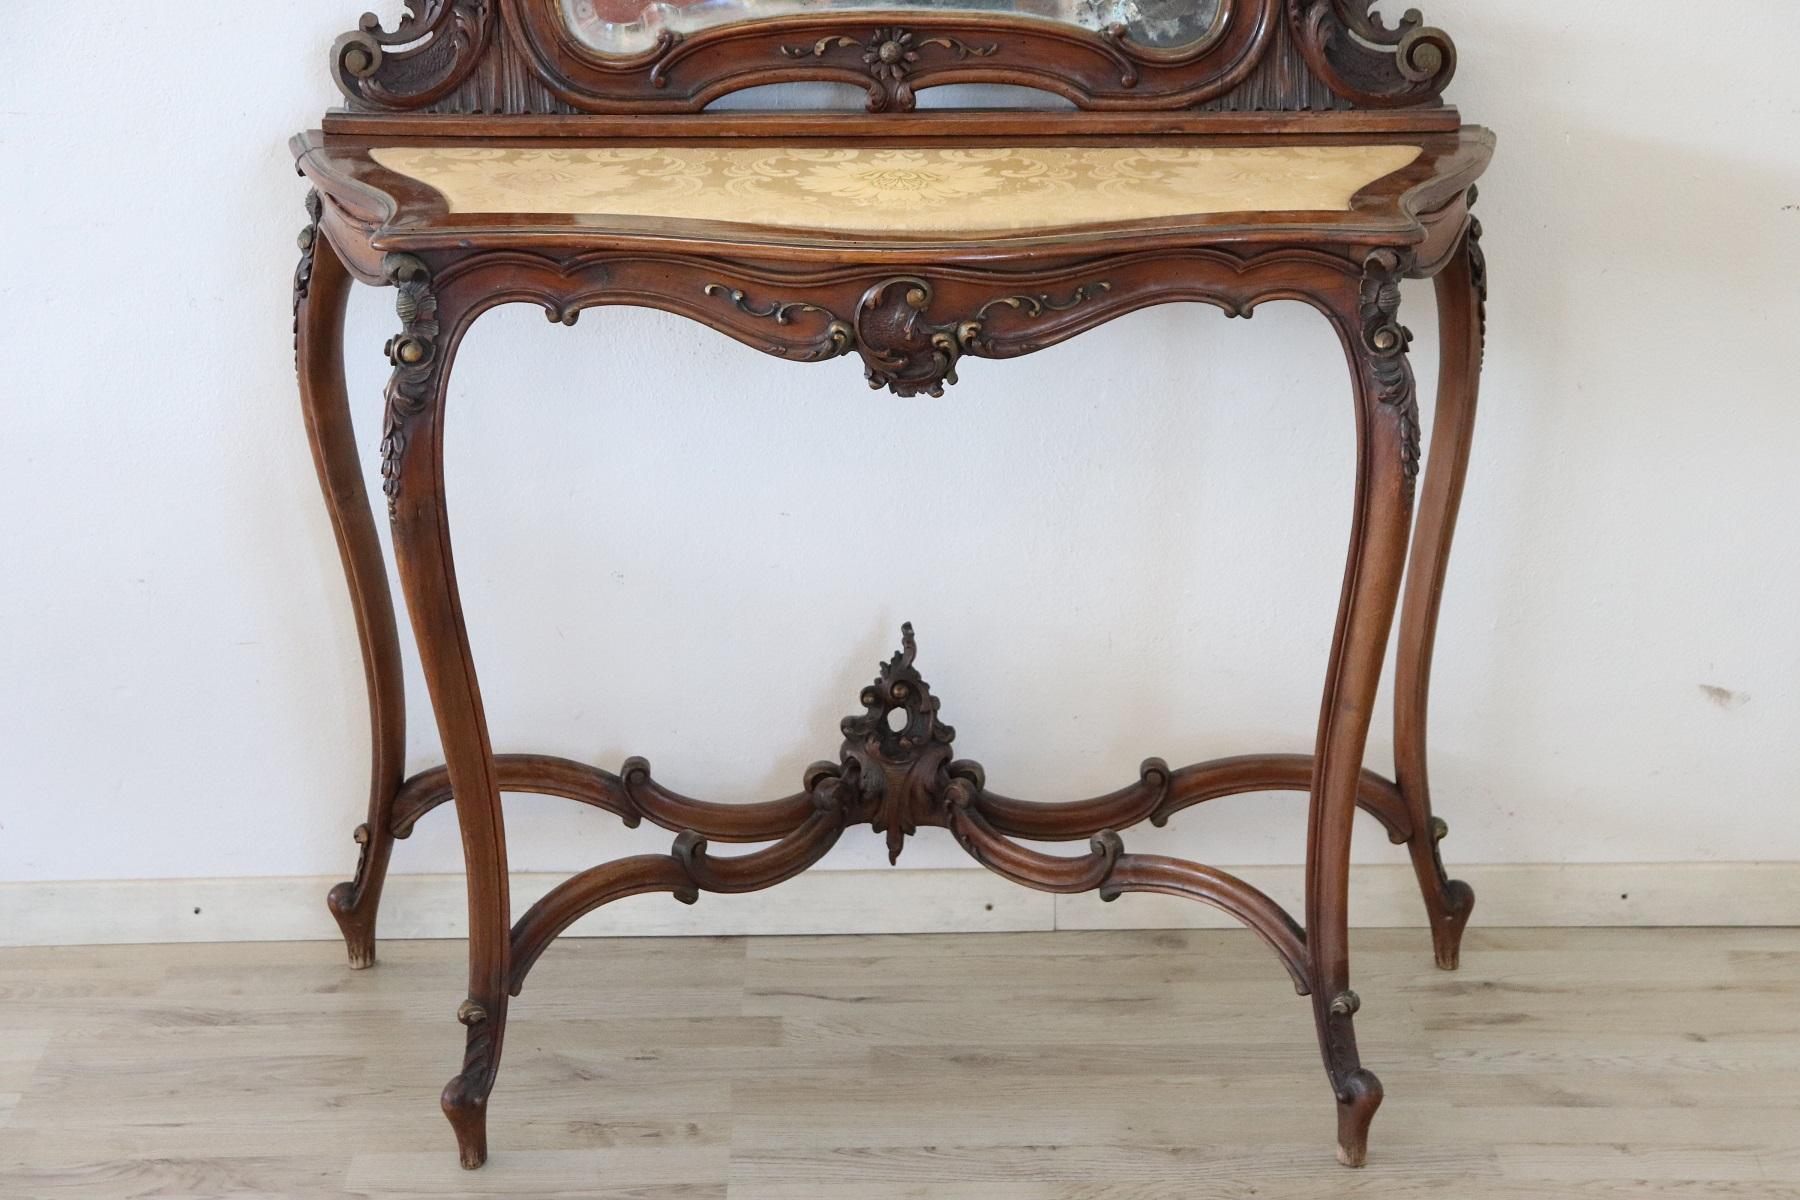 Antique Italian console table 1880s. The console is made of solid carved walnut with many curls and swirls of decoration. Perfect to be placed even in representative entrances. Large antique mirror. The top is covered in refined yellow damask fabric.